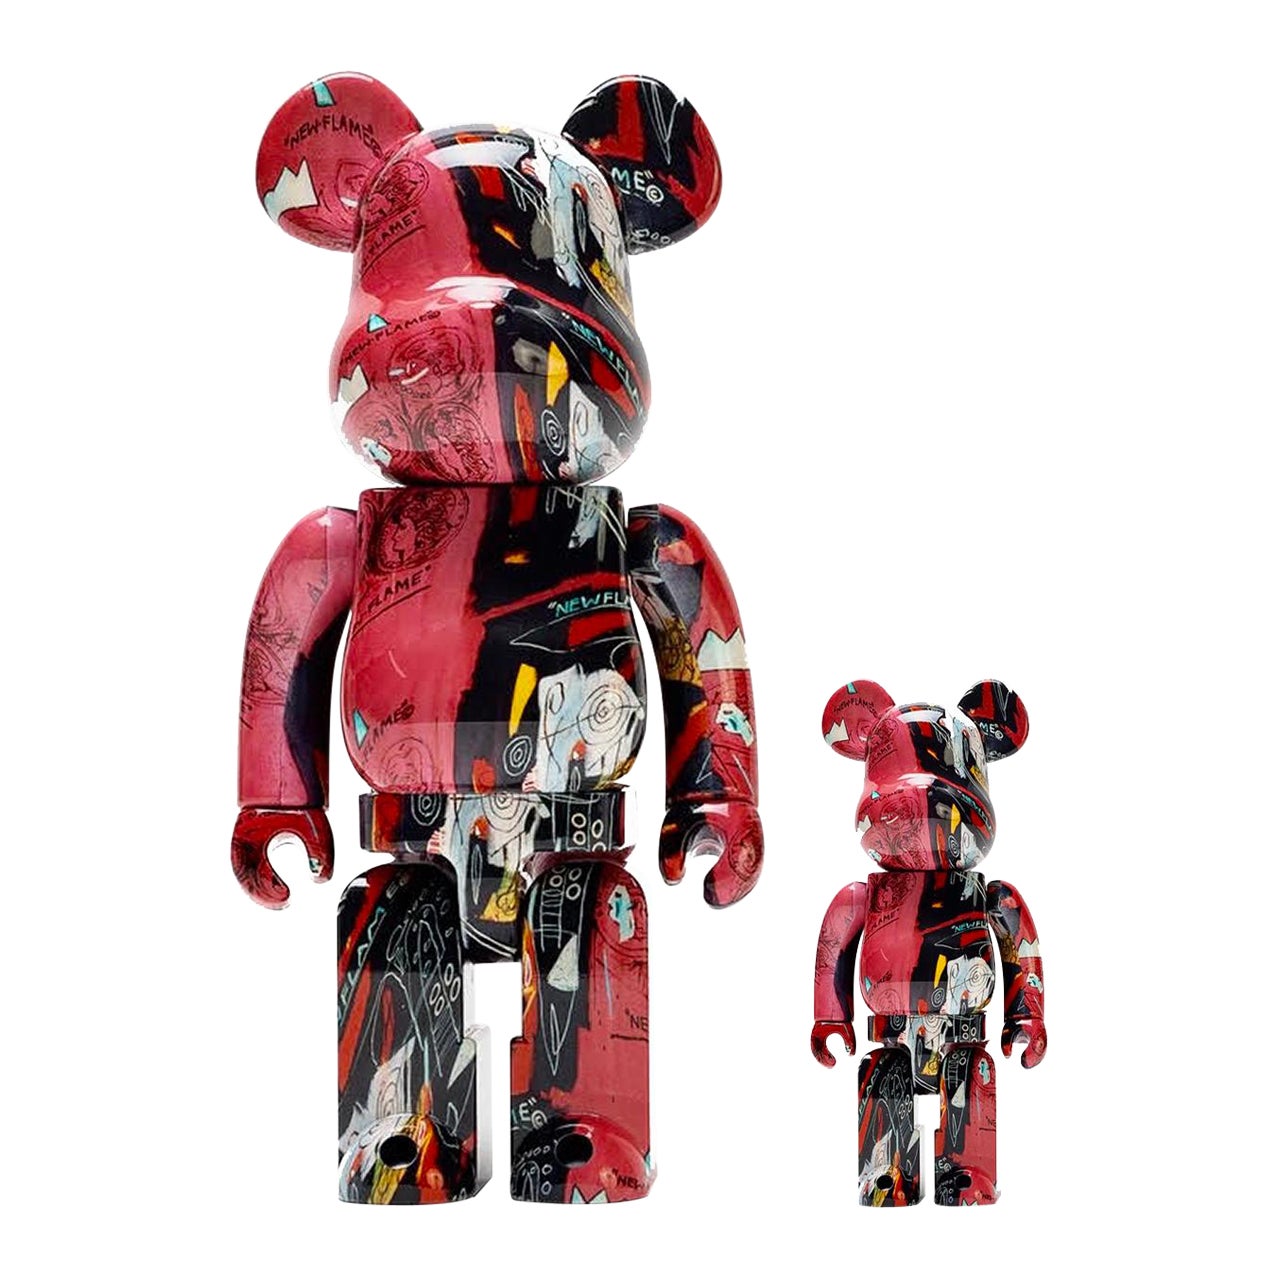 Be@rbrick x Warhol and Basquiat Estates 400% and 100%